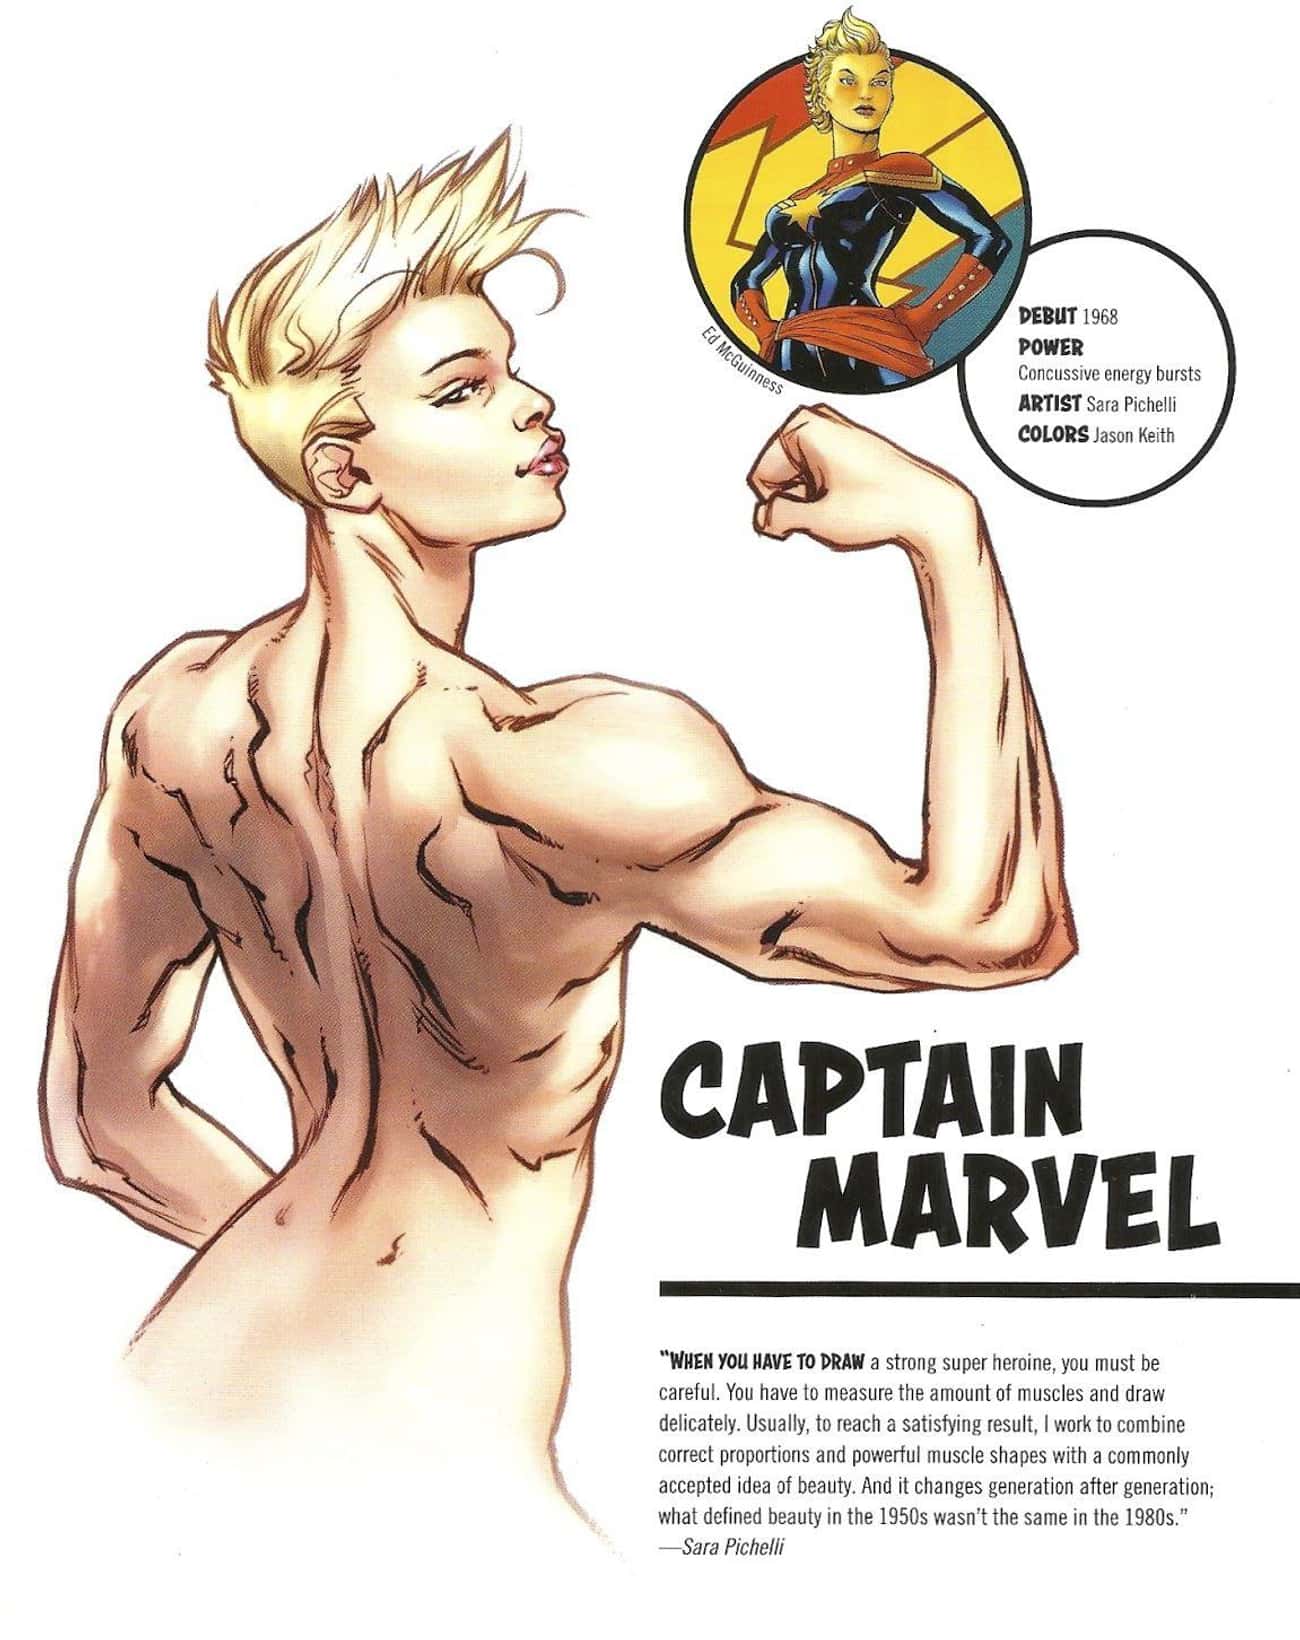 ESPN Published A Marvel Comics Insert Featuring Unclothed Superheroes